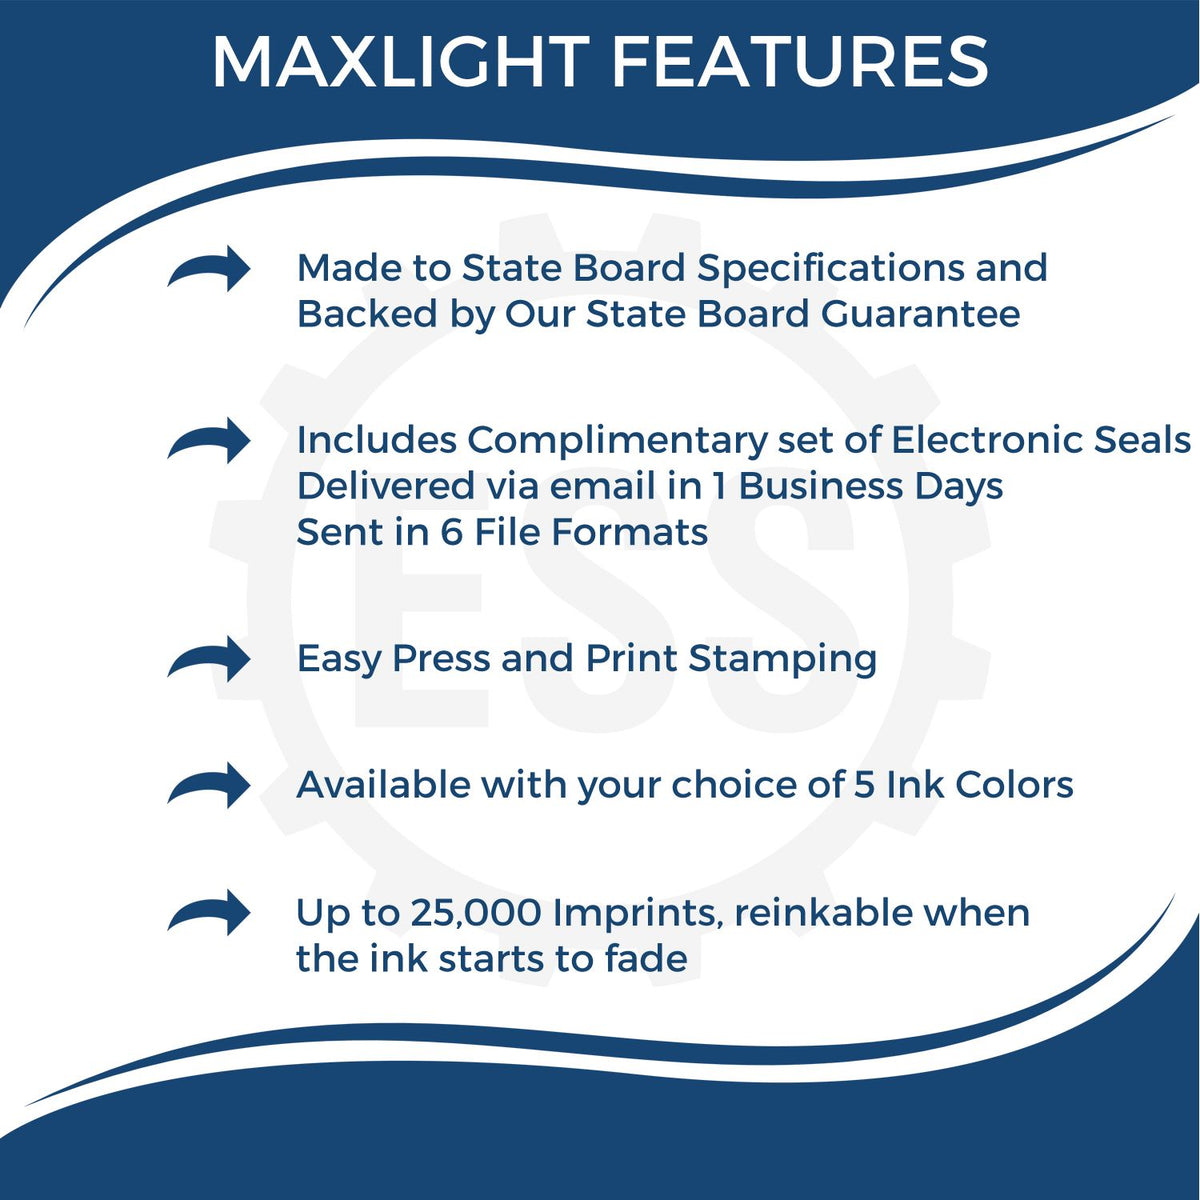 A picture of an infographic highlighting the selling points for the MaxLight Premium Pre-Inked Connecticut State Seal Notarial Stamp